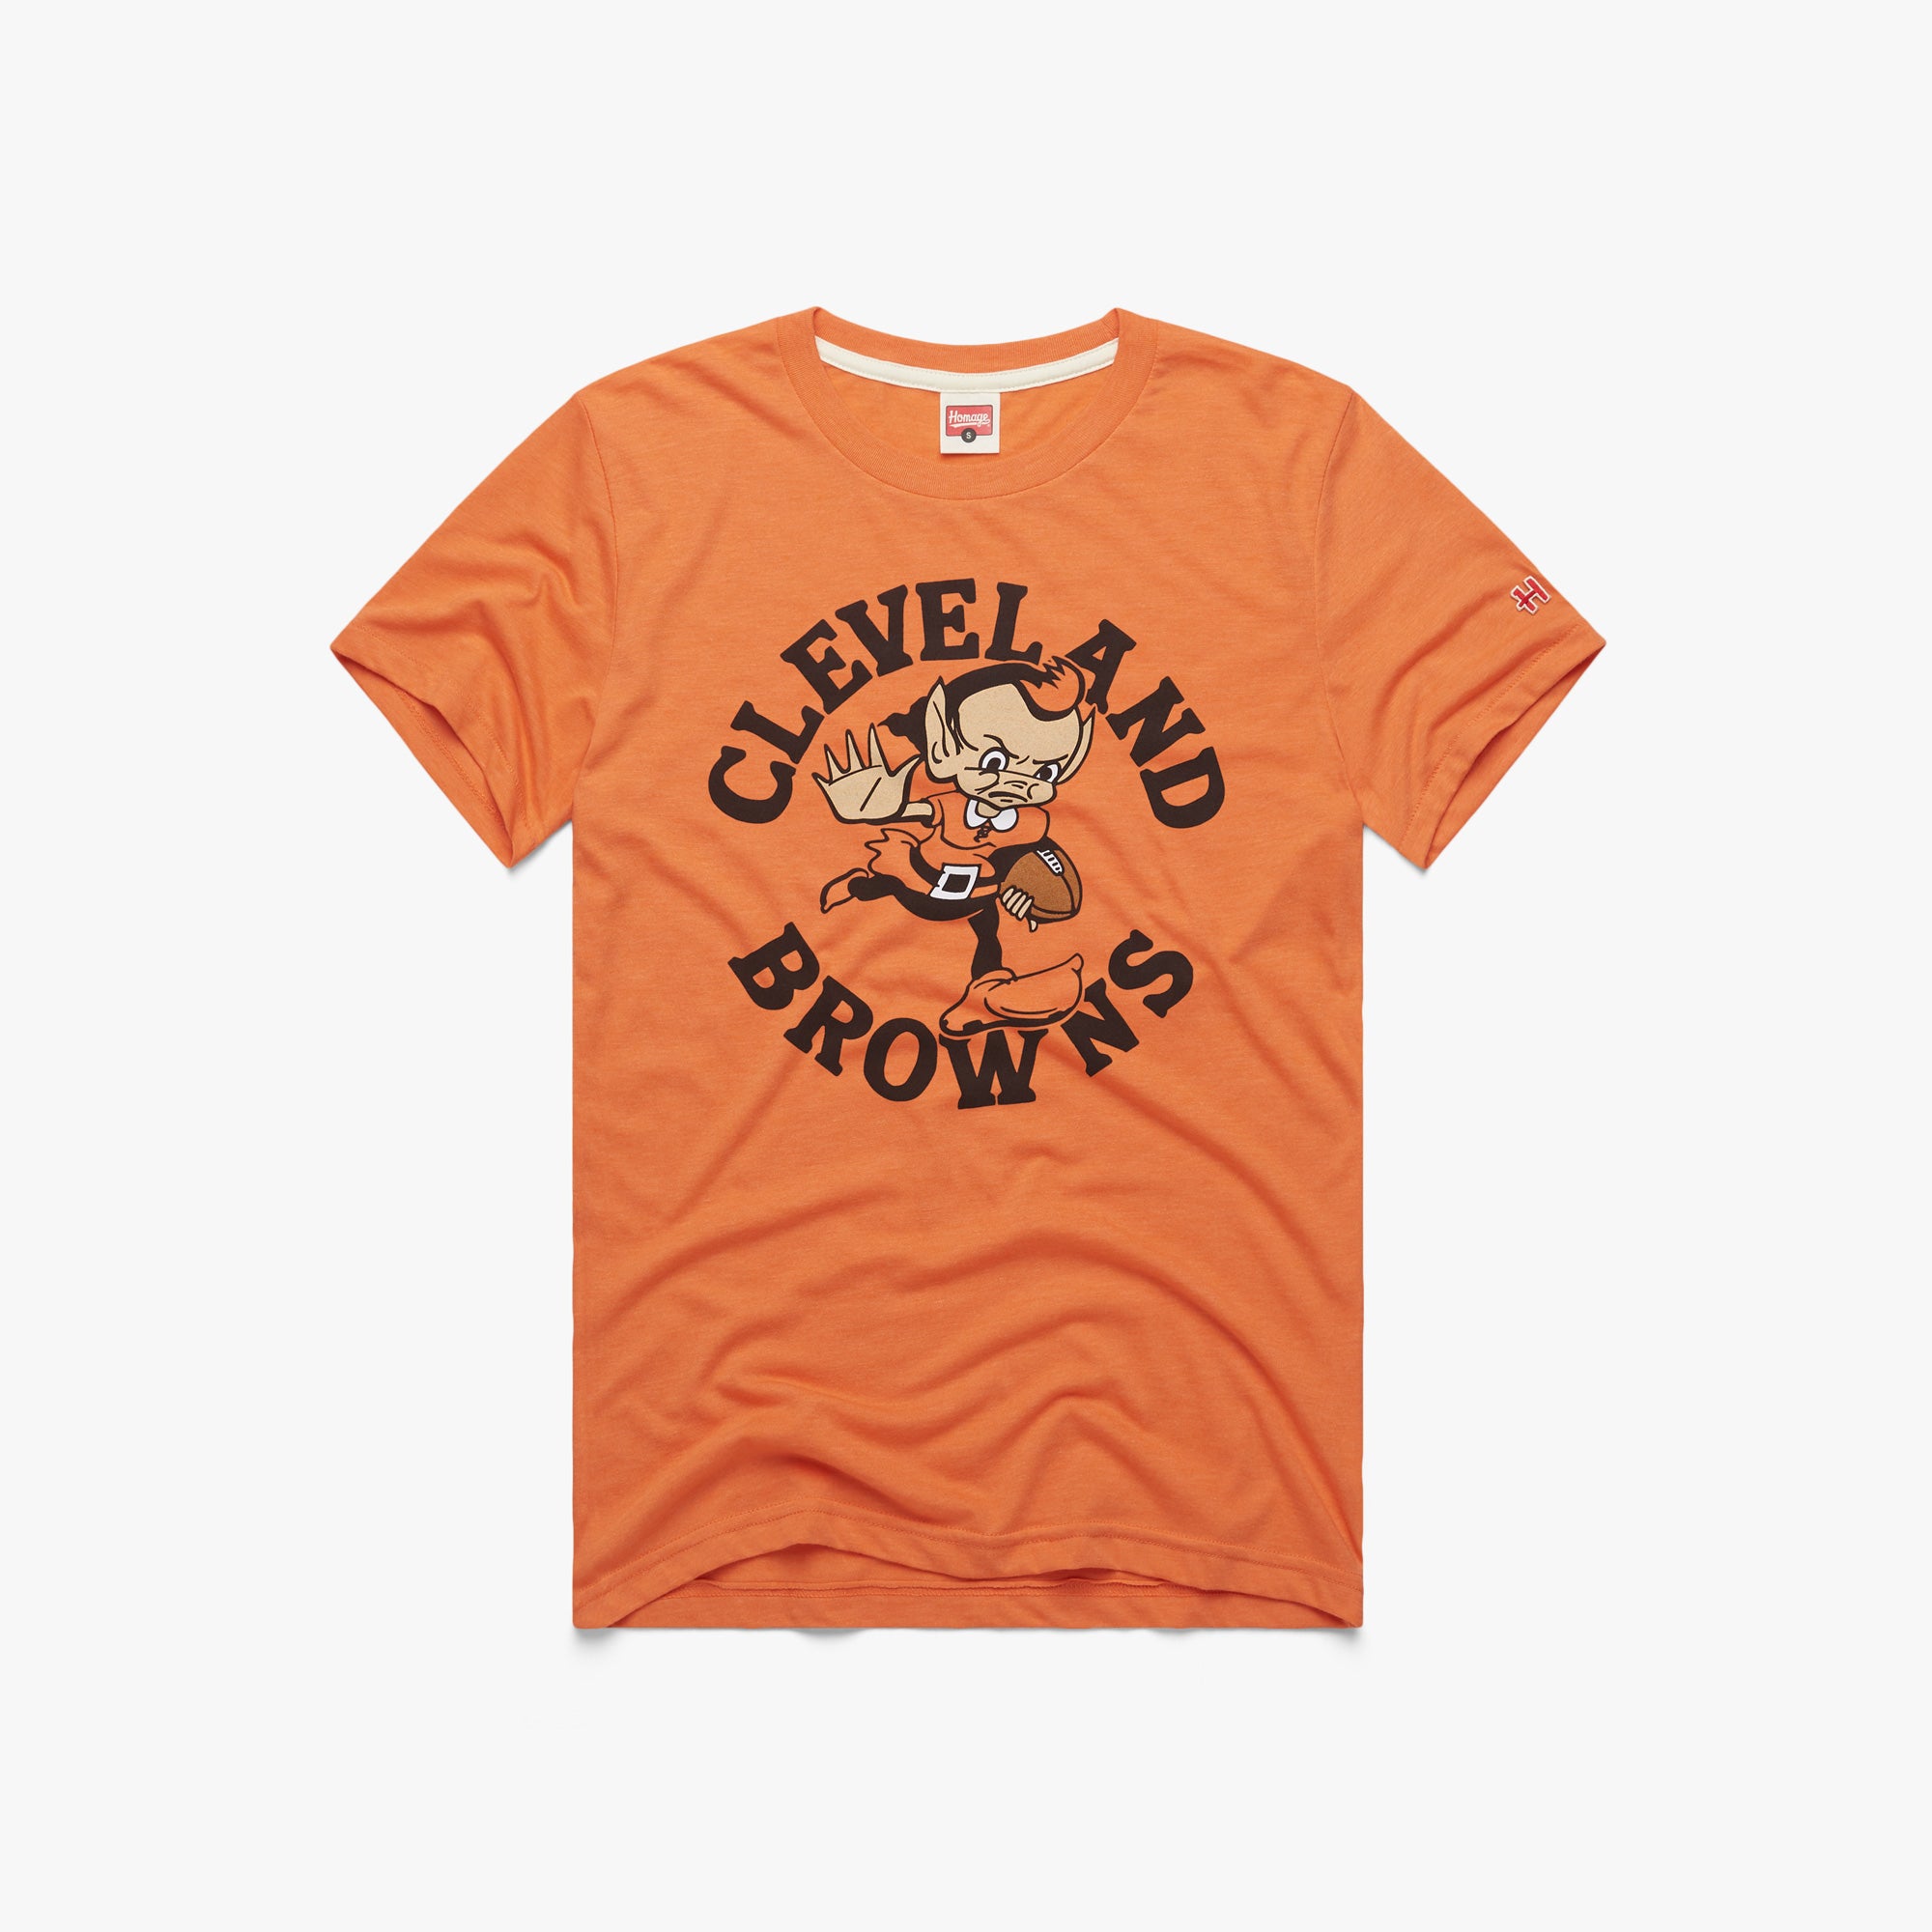 BrooklynThread Vintage T-Shirt | Cleveland Browns Football Sports Streetwear Raglan Pullover Top Graphic Tee 70's 80's Orange Brown | Size S/M